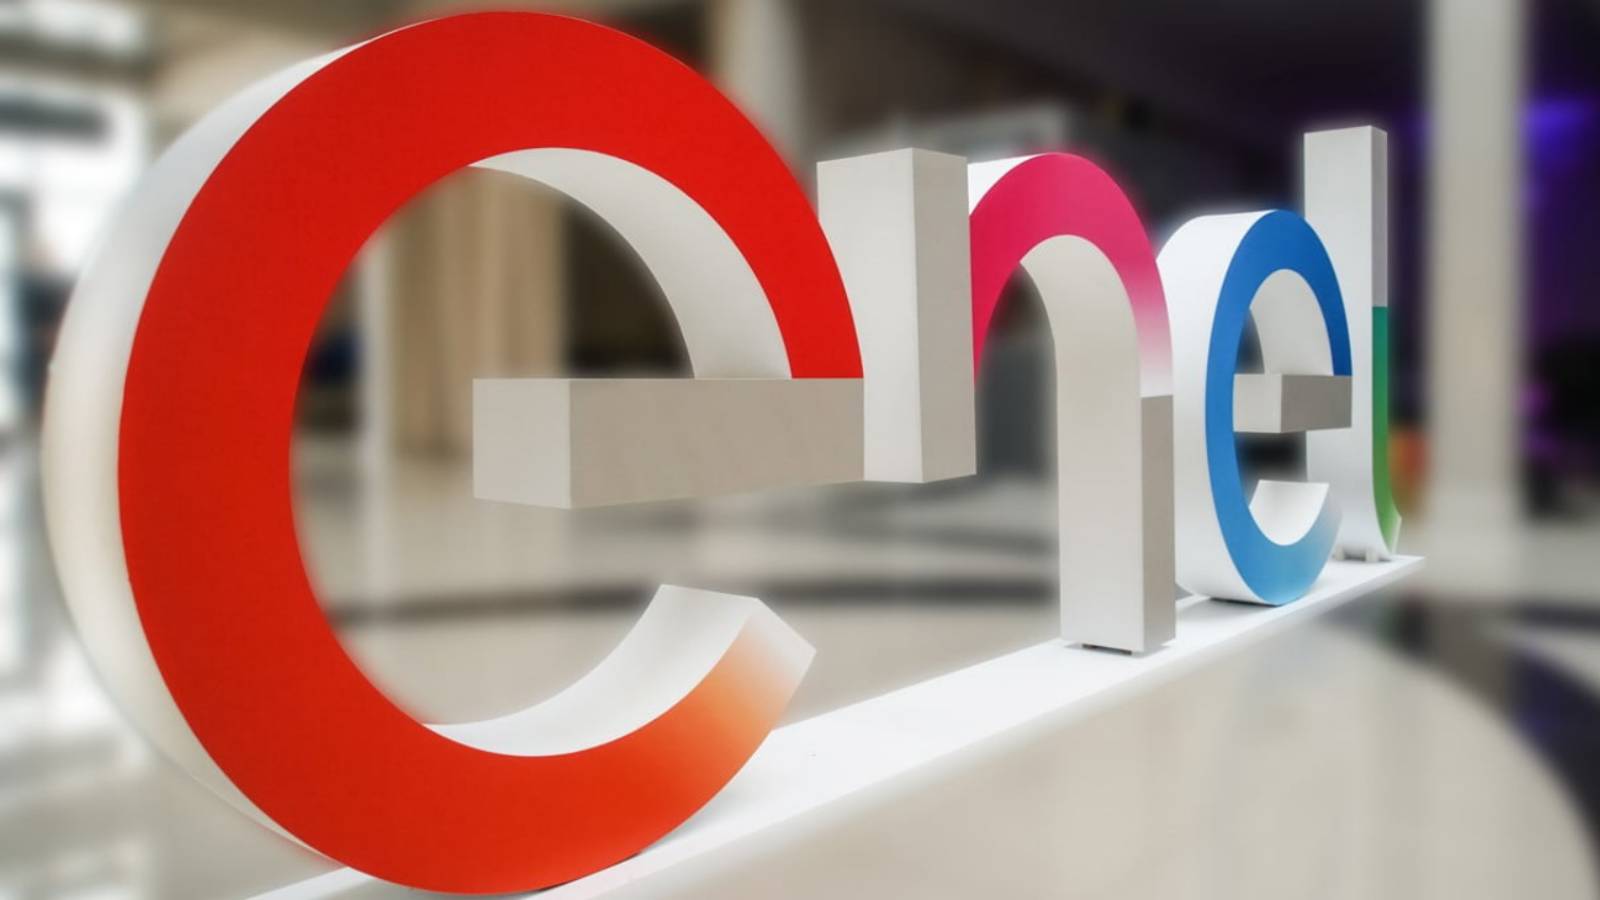 Enel LAST MINUTE Information Officially Transmitted to Romanians Invoices